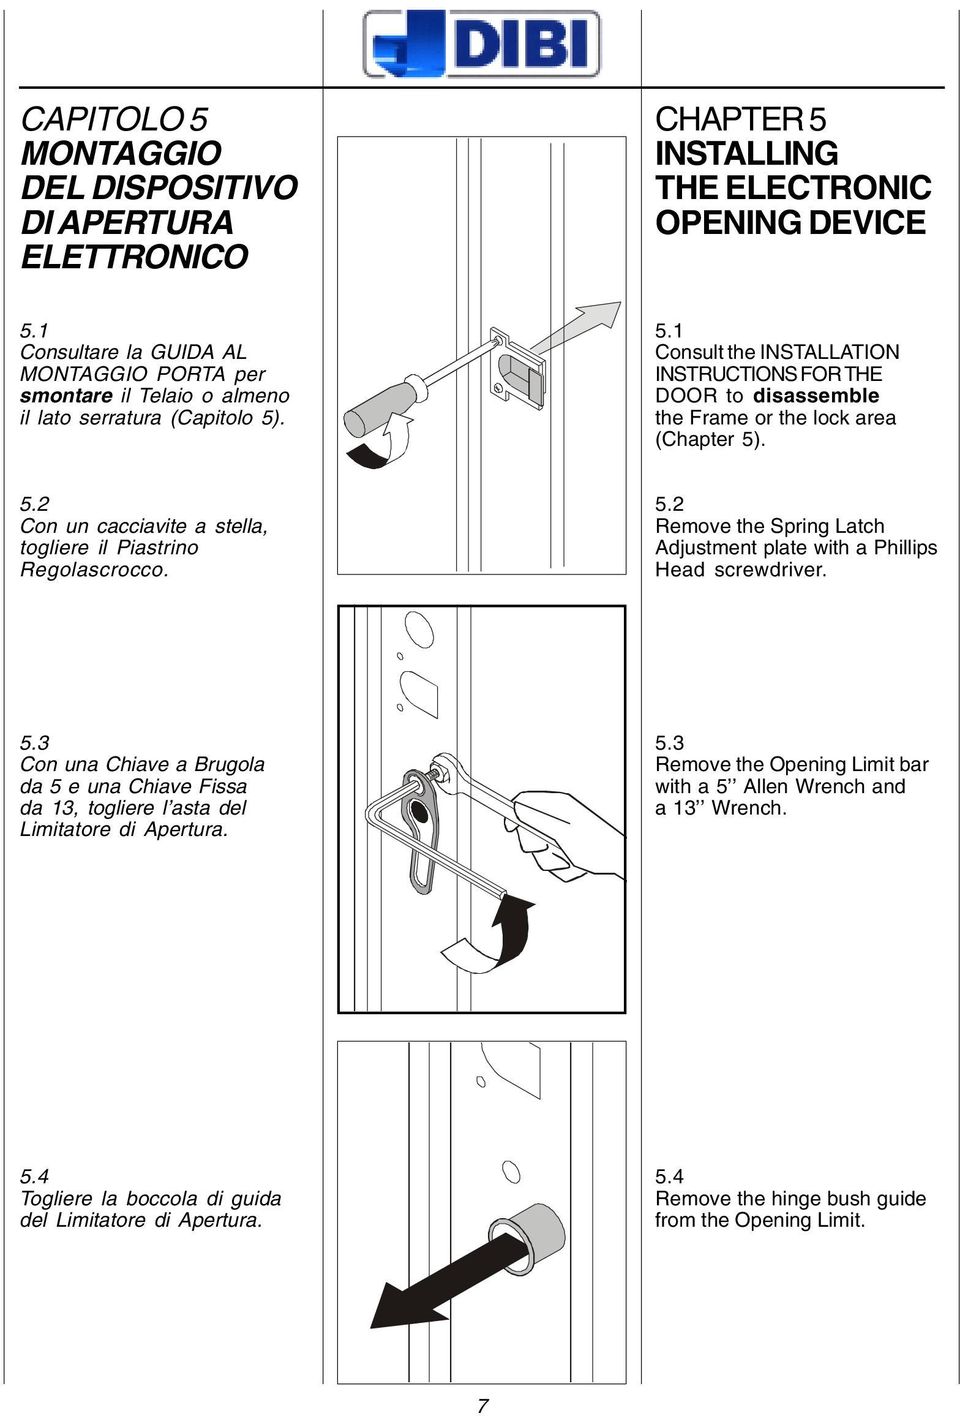 . 5.1 Consult the INSTALLATION INSTRUCTIONS FOR THE DOOR to disassemble the Frame or the lock area (Chapter 5). 5.2 Con un cacciavite a stella, togliere il Piastrino Regolascrocco. 5.2 Remove the Spring Latch Adjustment plate with a Phillips Head screwdriver.